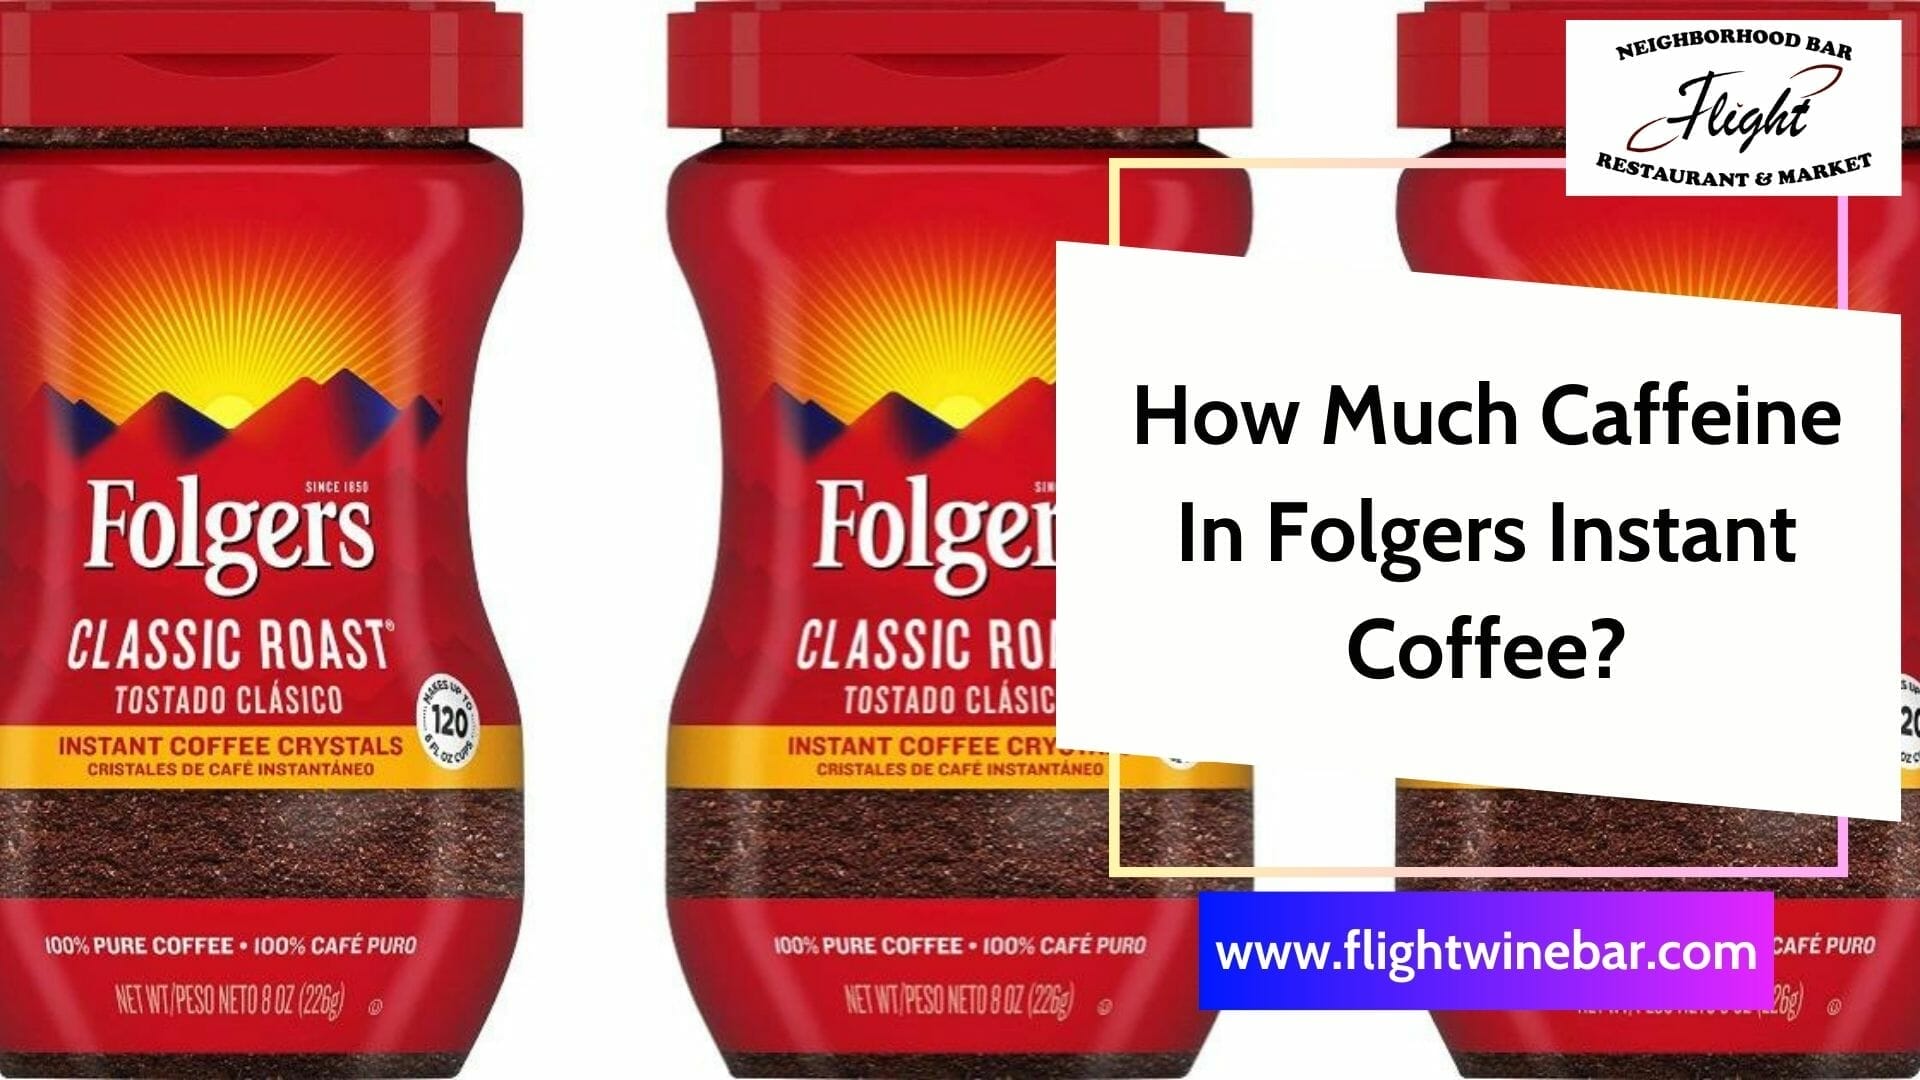 How Much Caffeine In Folgers Instant Coffee